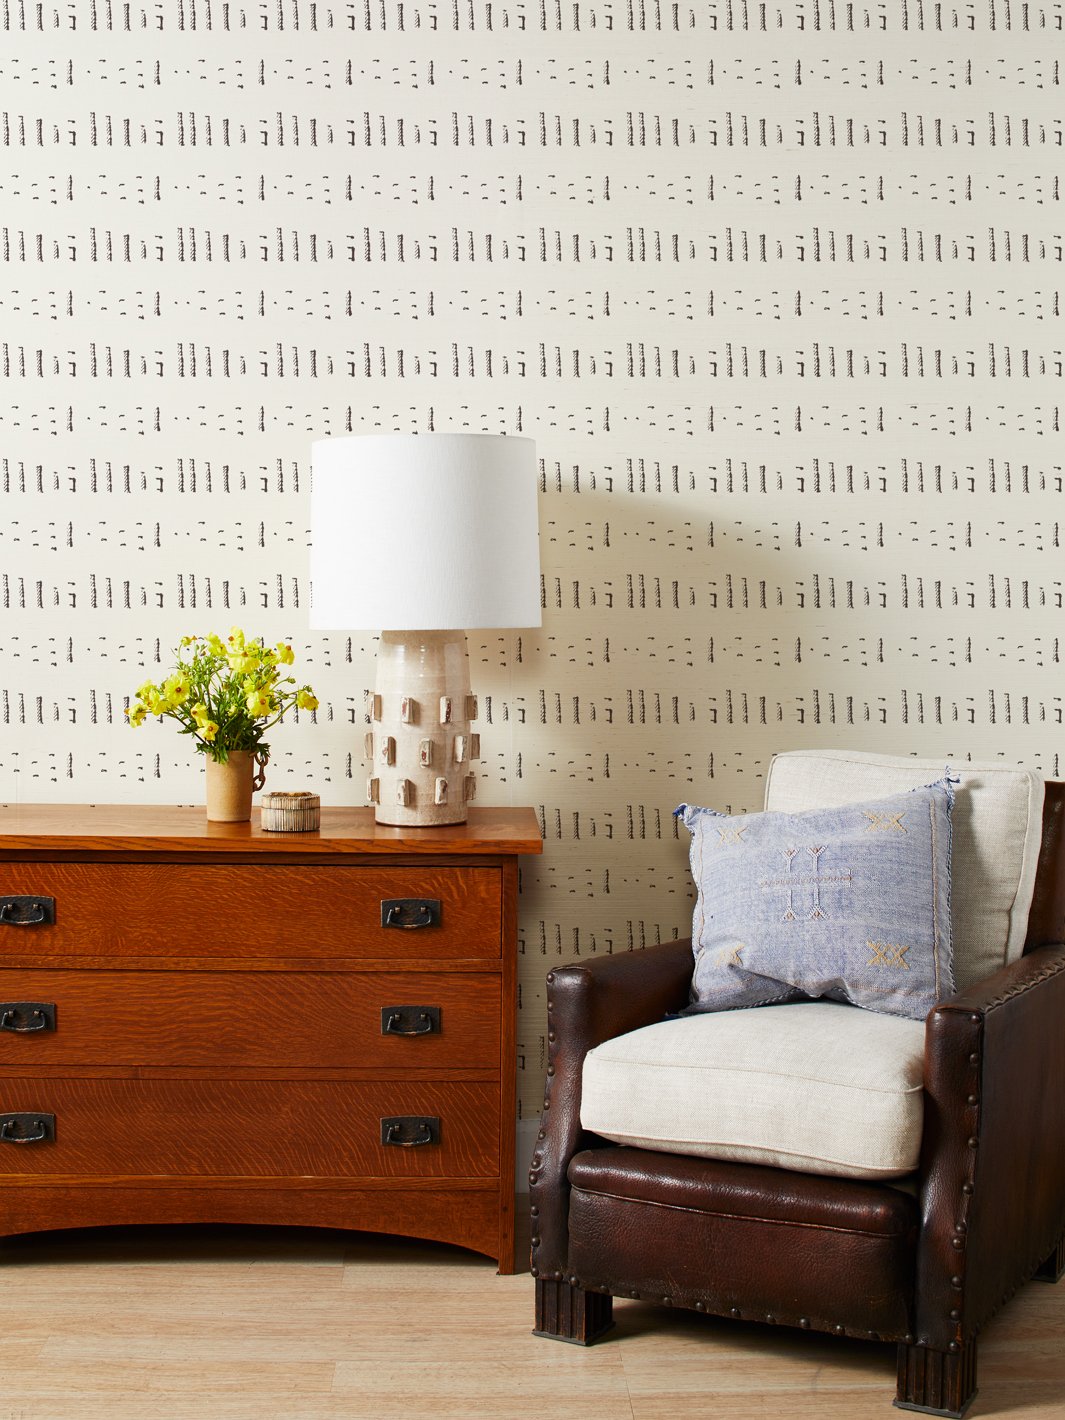 'Stitch' Grasscloth' Wallpaper by Nathan Turner - Chocolate